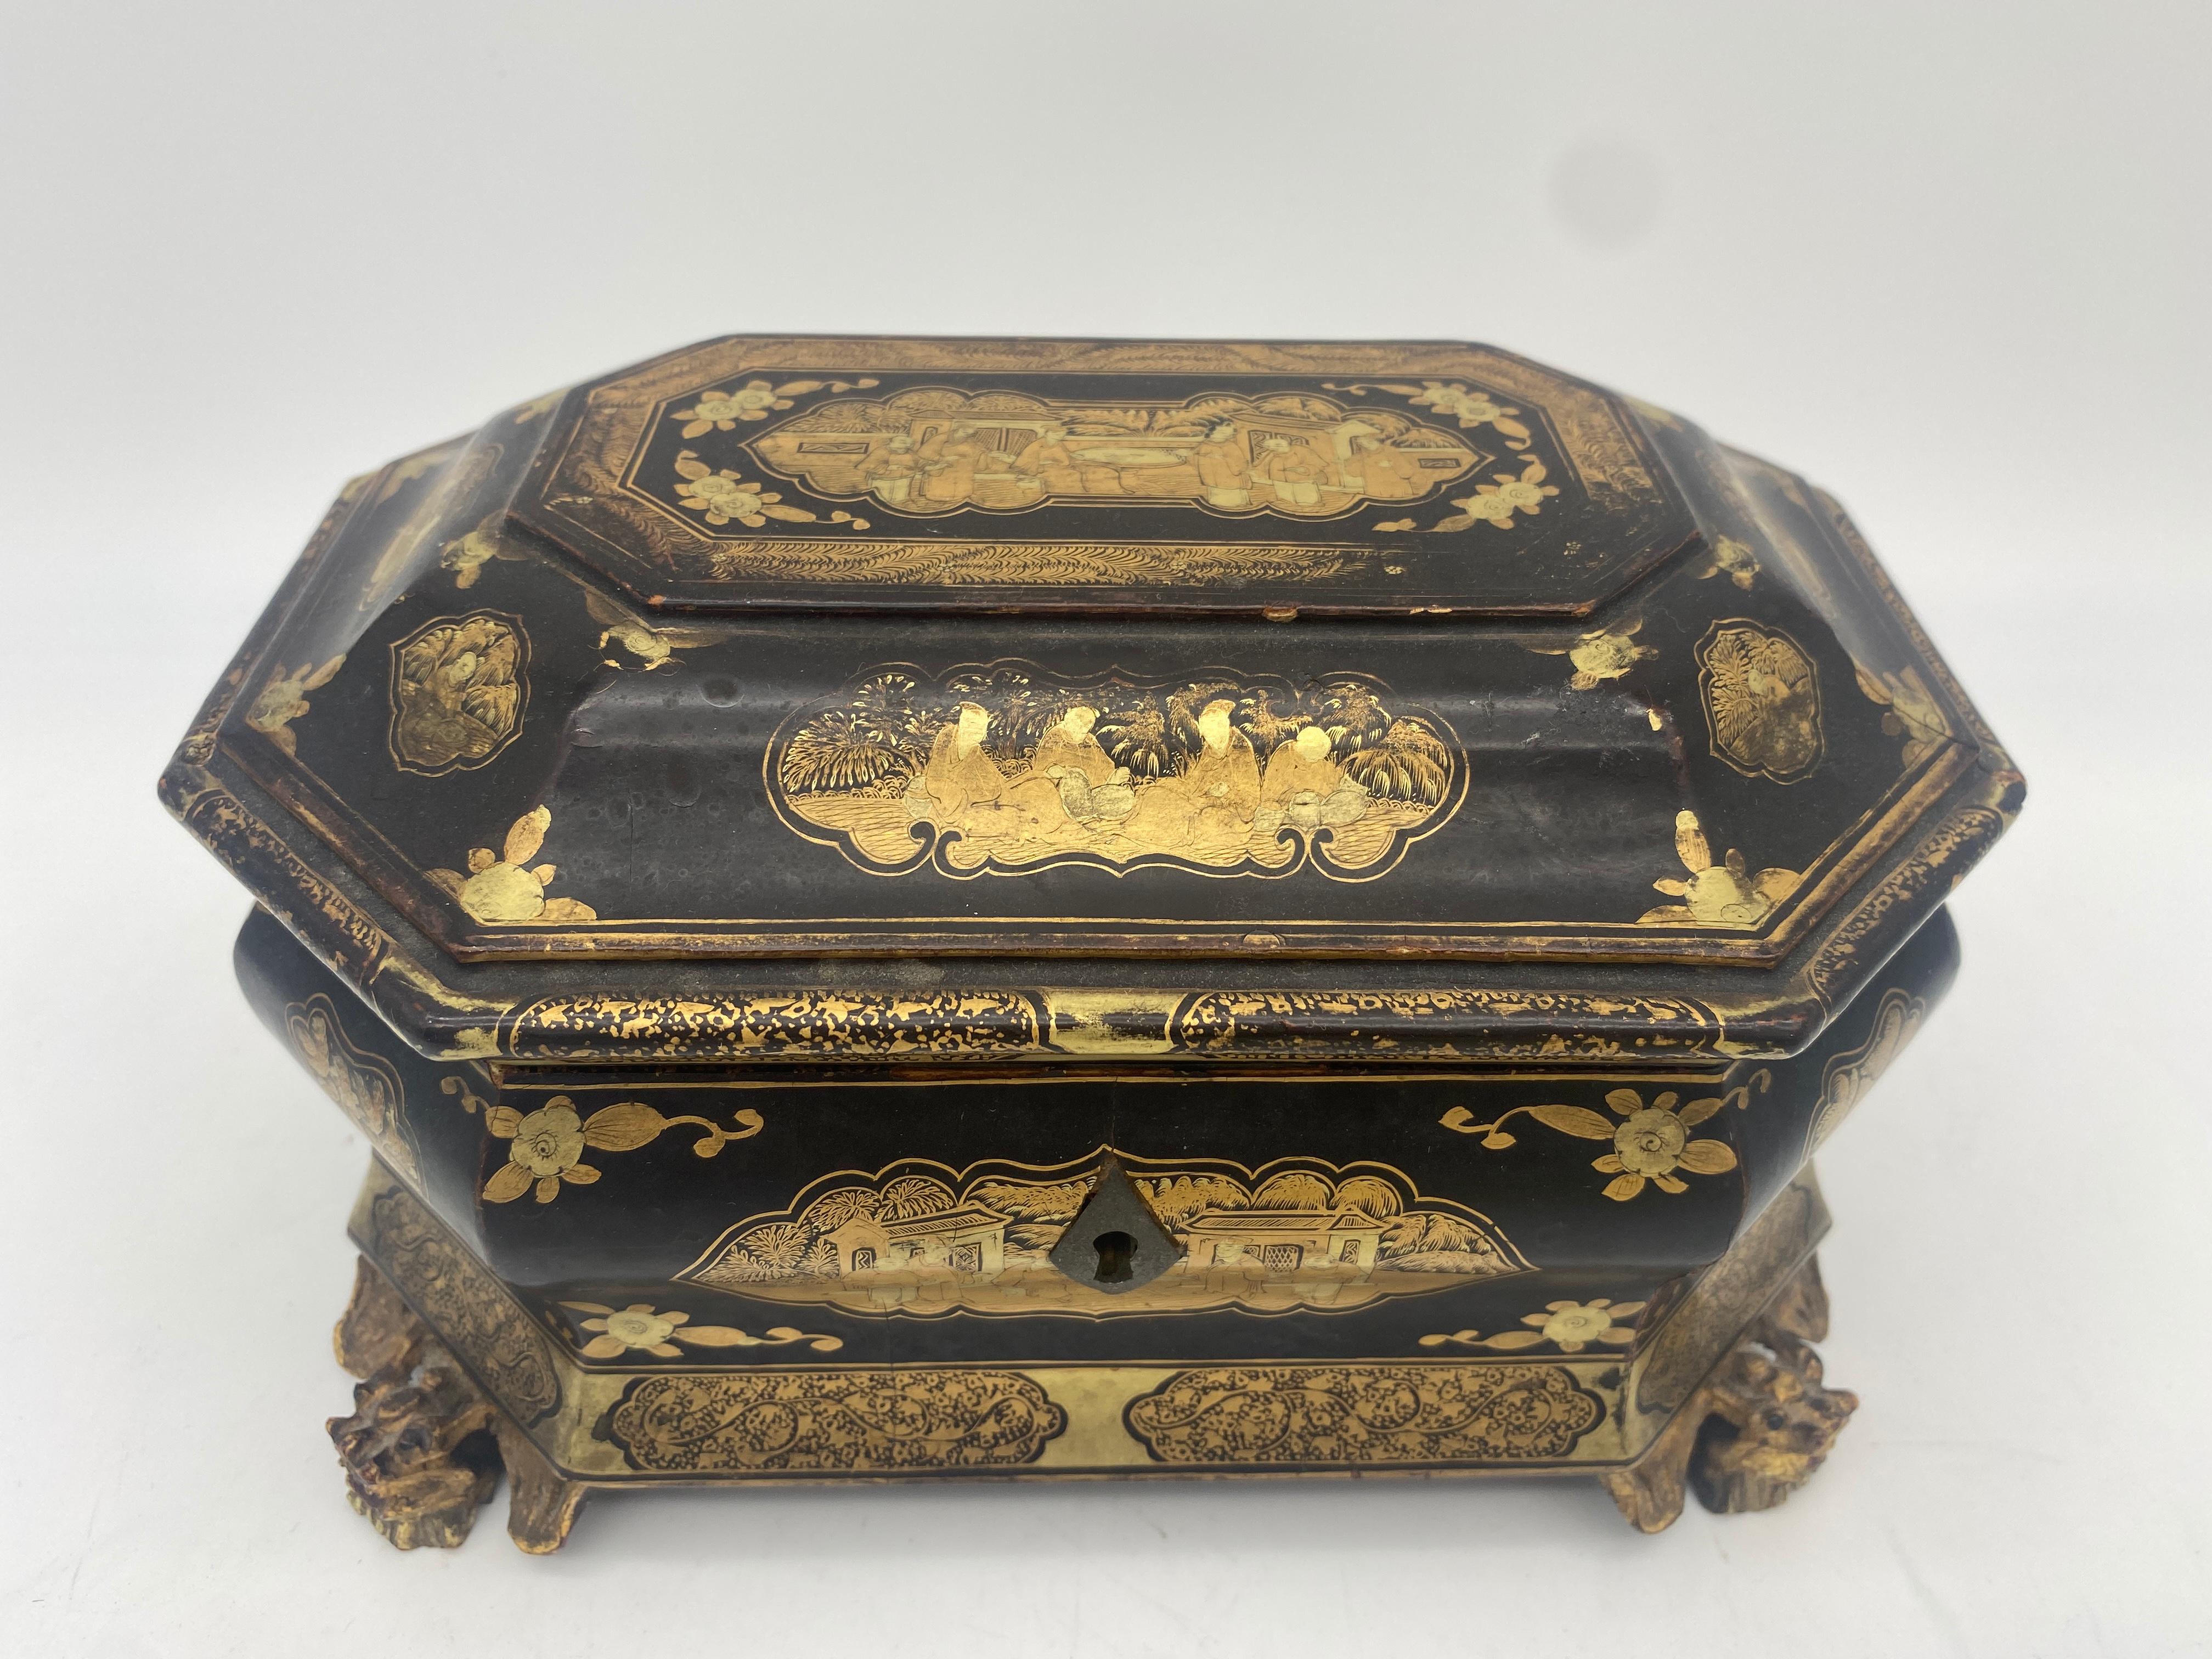 19th century golden black lacquer Chinese tea caddy with two pewters with 4 foots, the gilt body decorated with panels of landscapes, two pewters with covers, one pewter lead ring break down, otherwise it is very beautiful small piece. See more